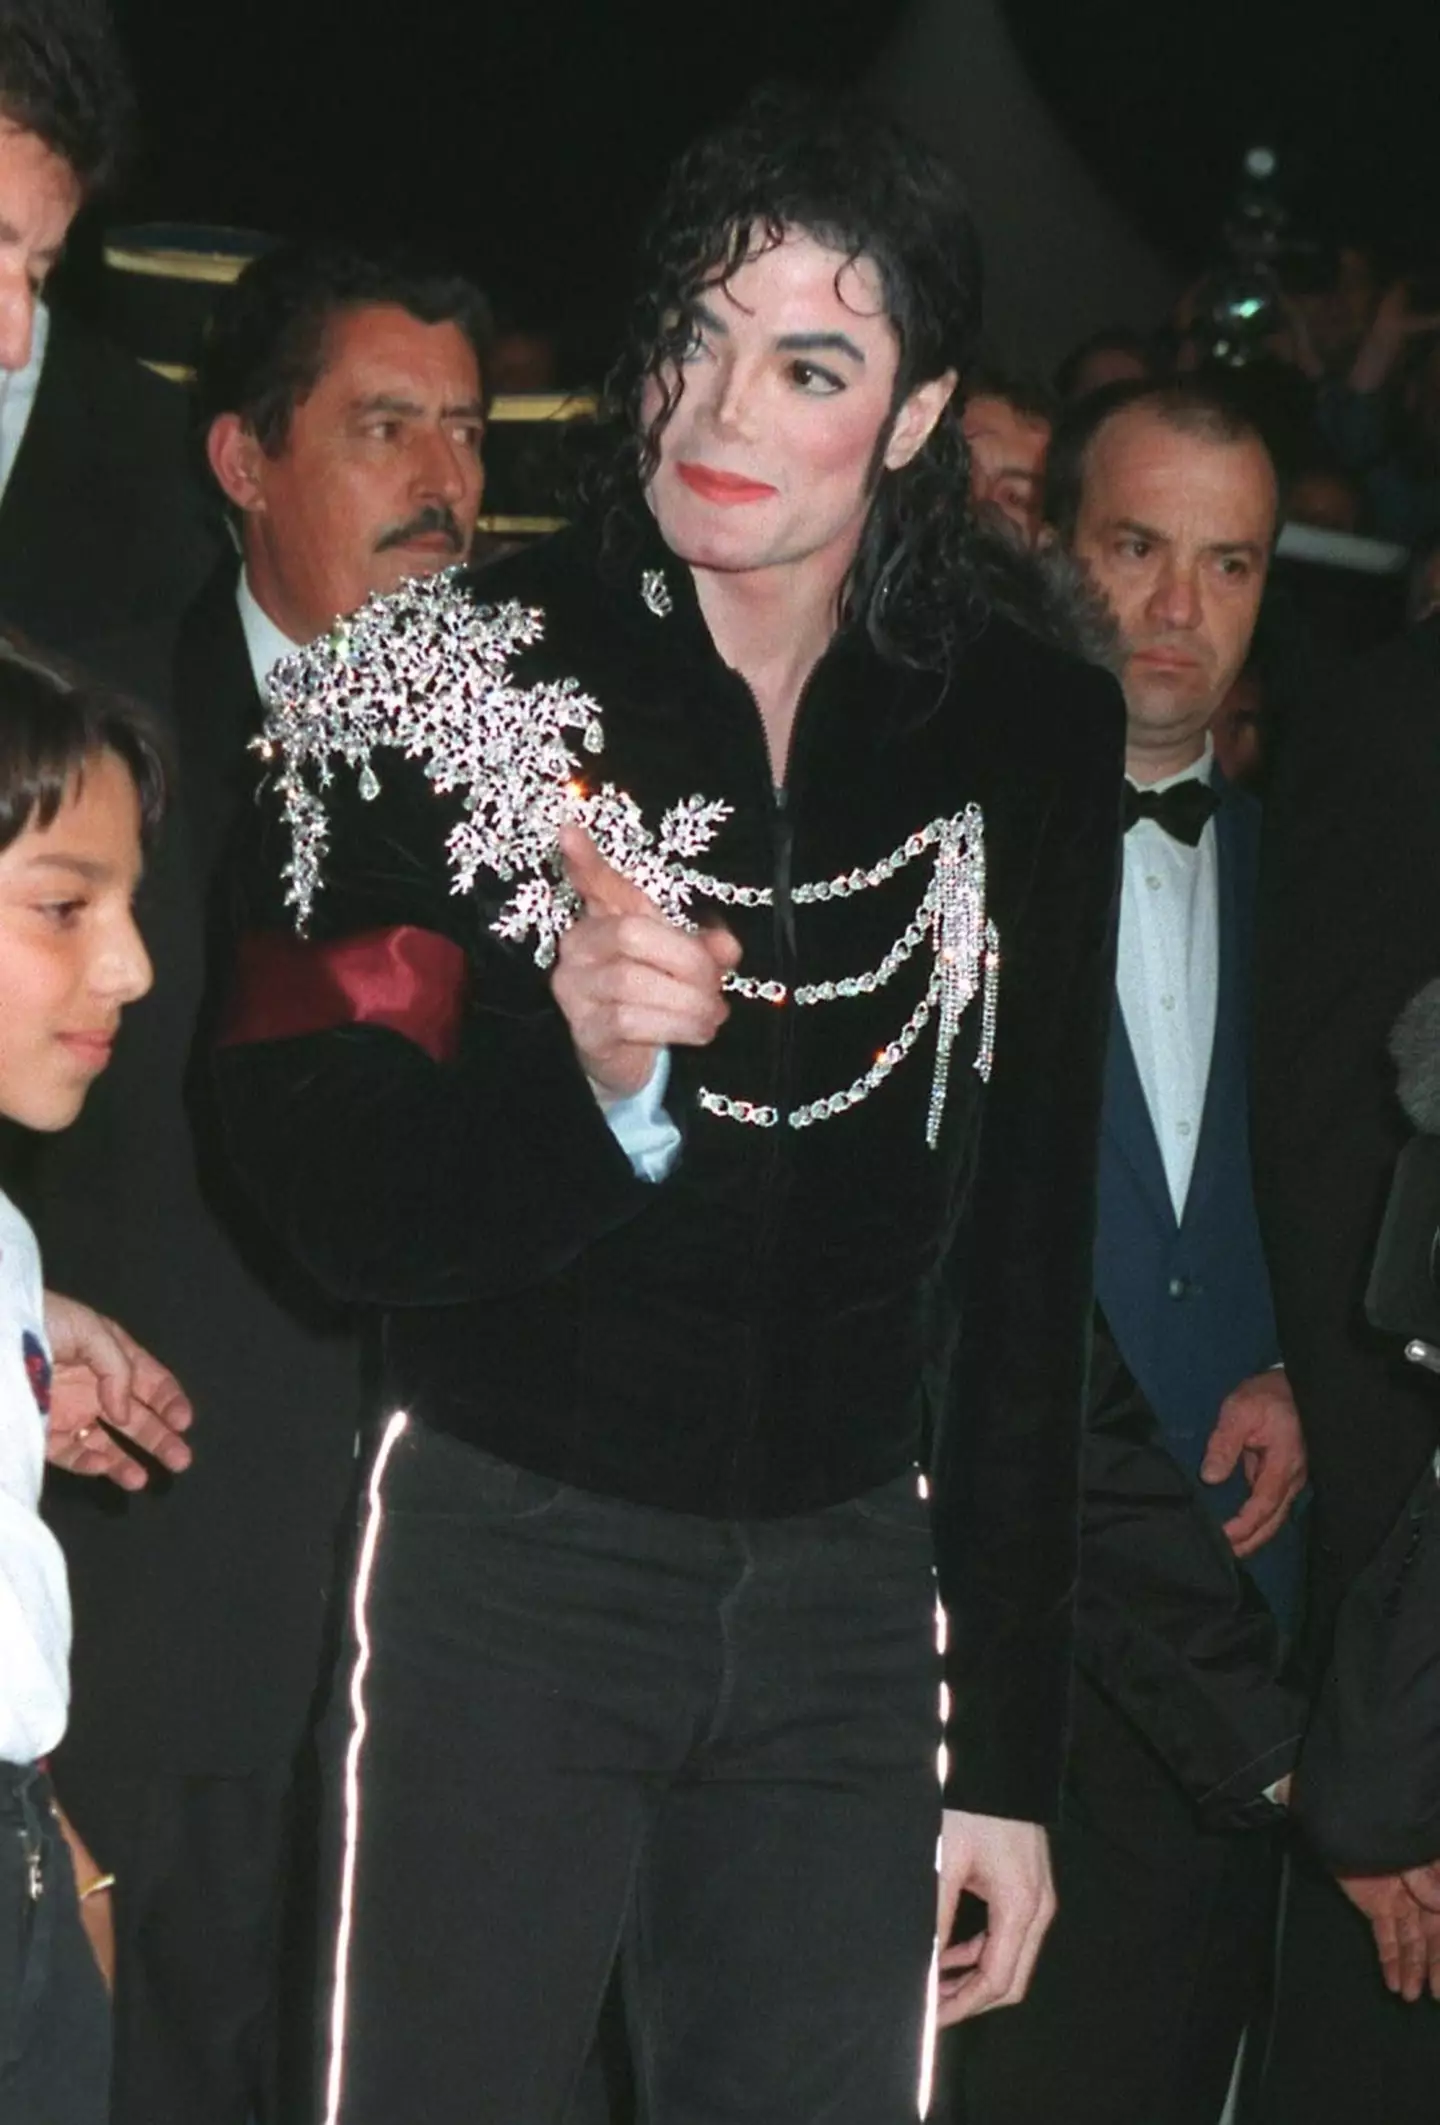 Allegations have been made against Michael Jackson in the past.